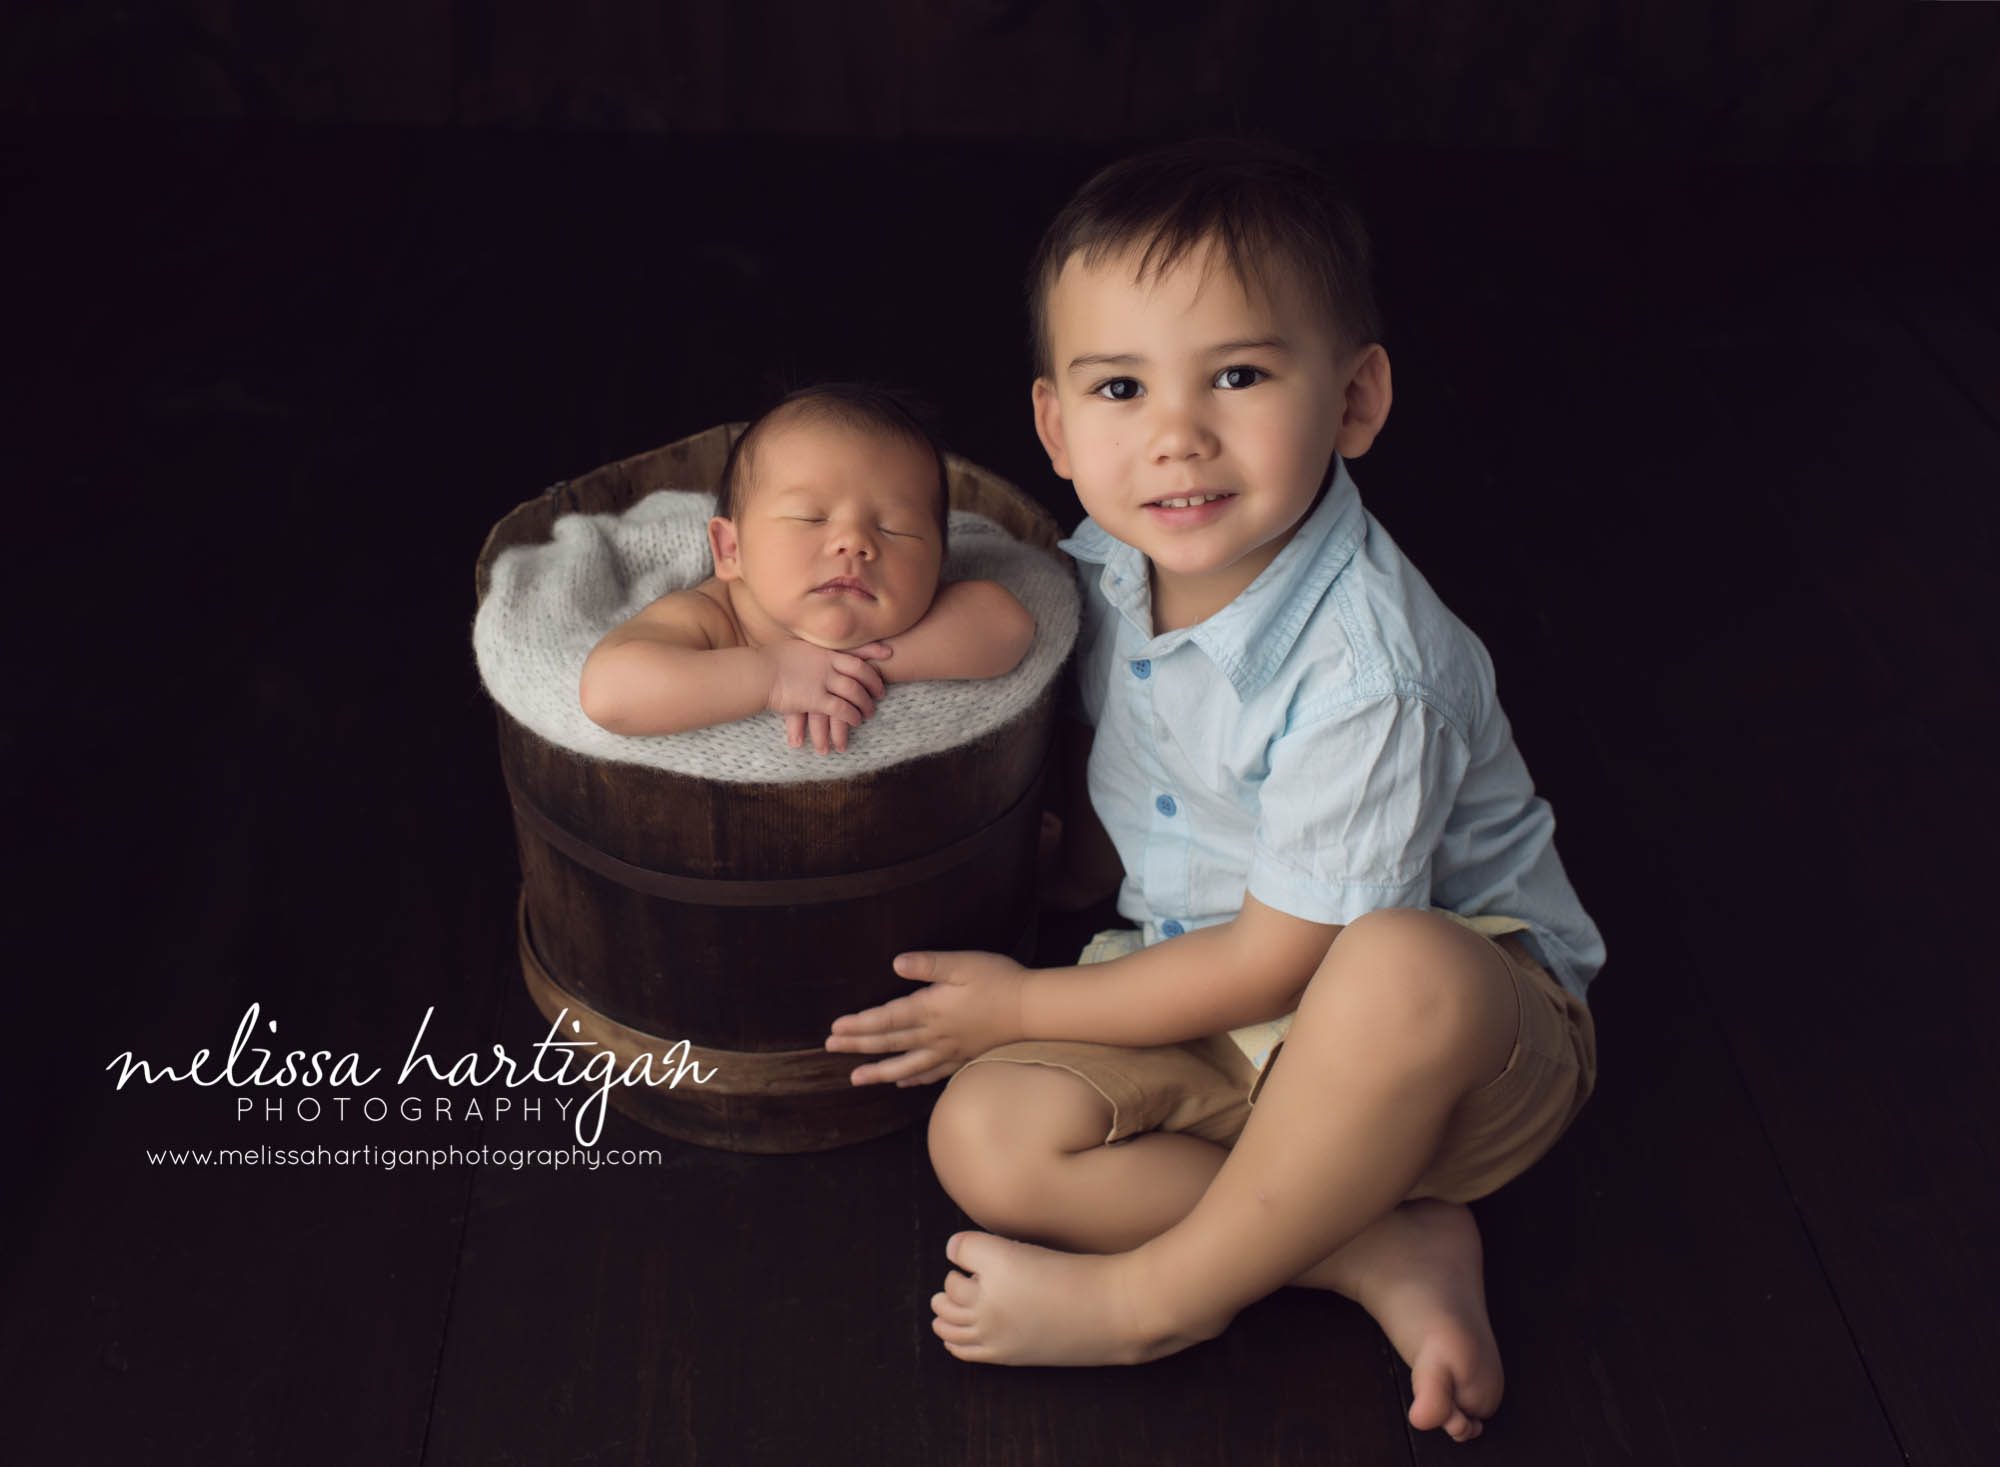 Melissa Hartigan Photography Maternity and Newborn Connecticut Photographer Lucas Newborn Session Baby boy sleeping in wooden bucket with light blue knit blanket posed with big brother